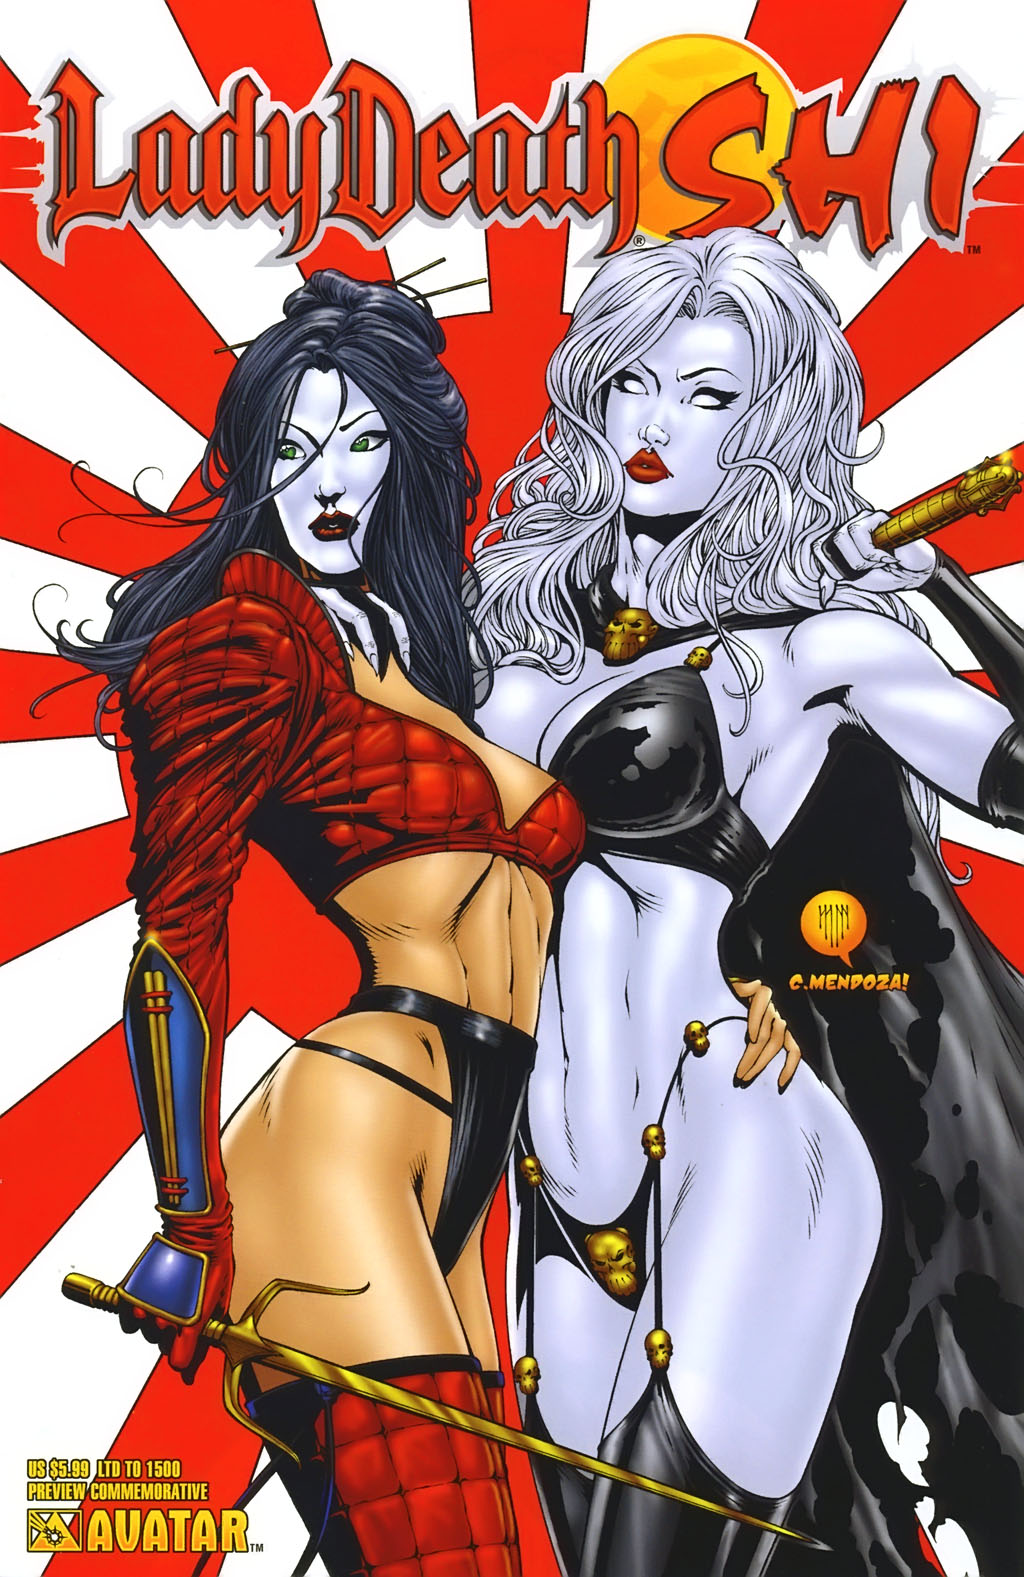 Read online Lady Death/Shi comic -  Issue # _Preview - 1